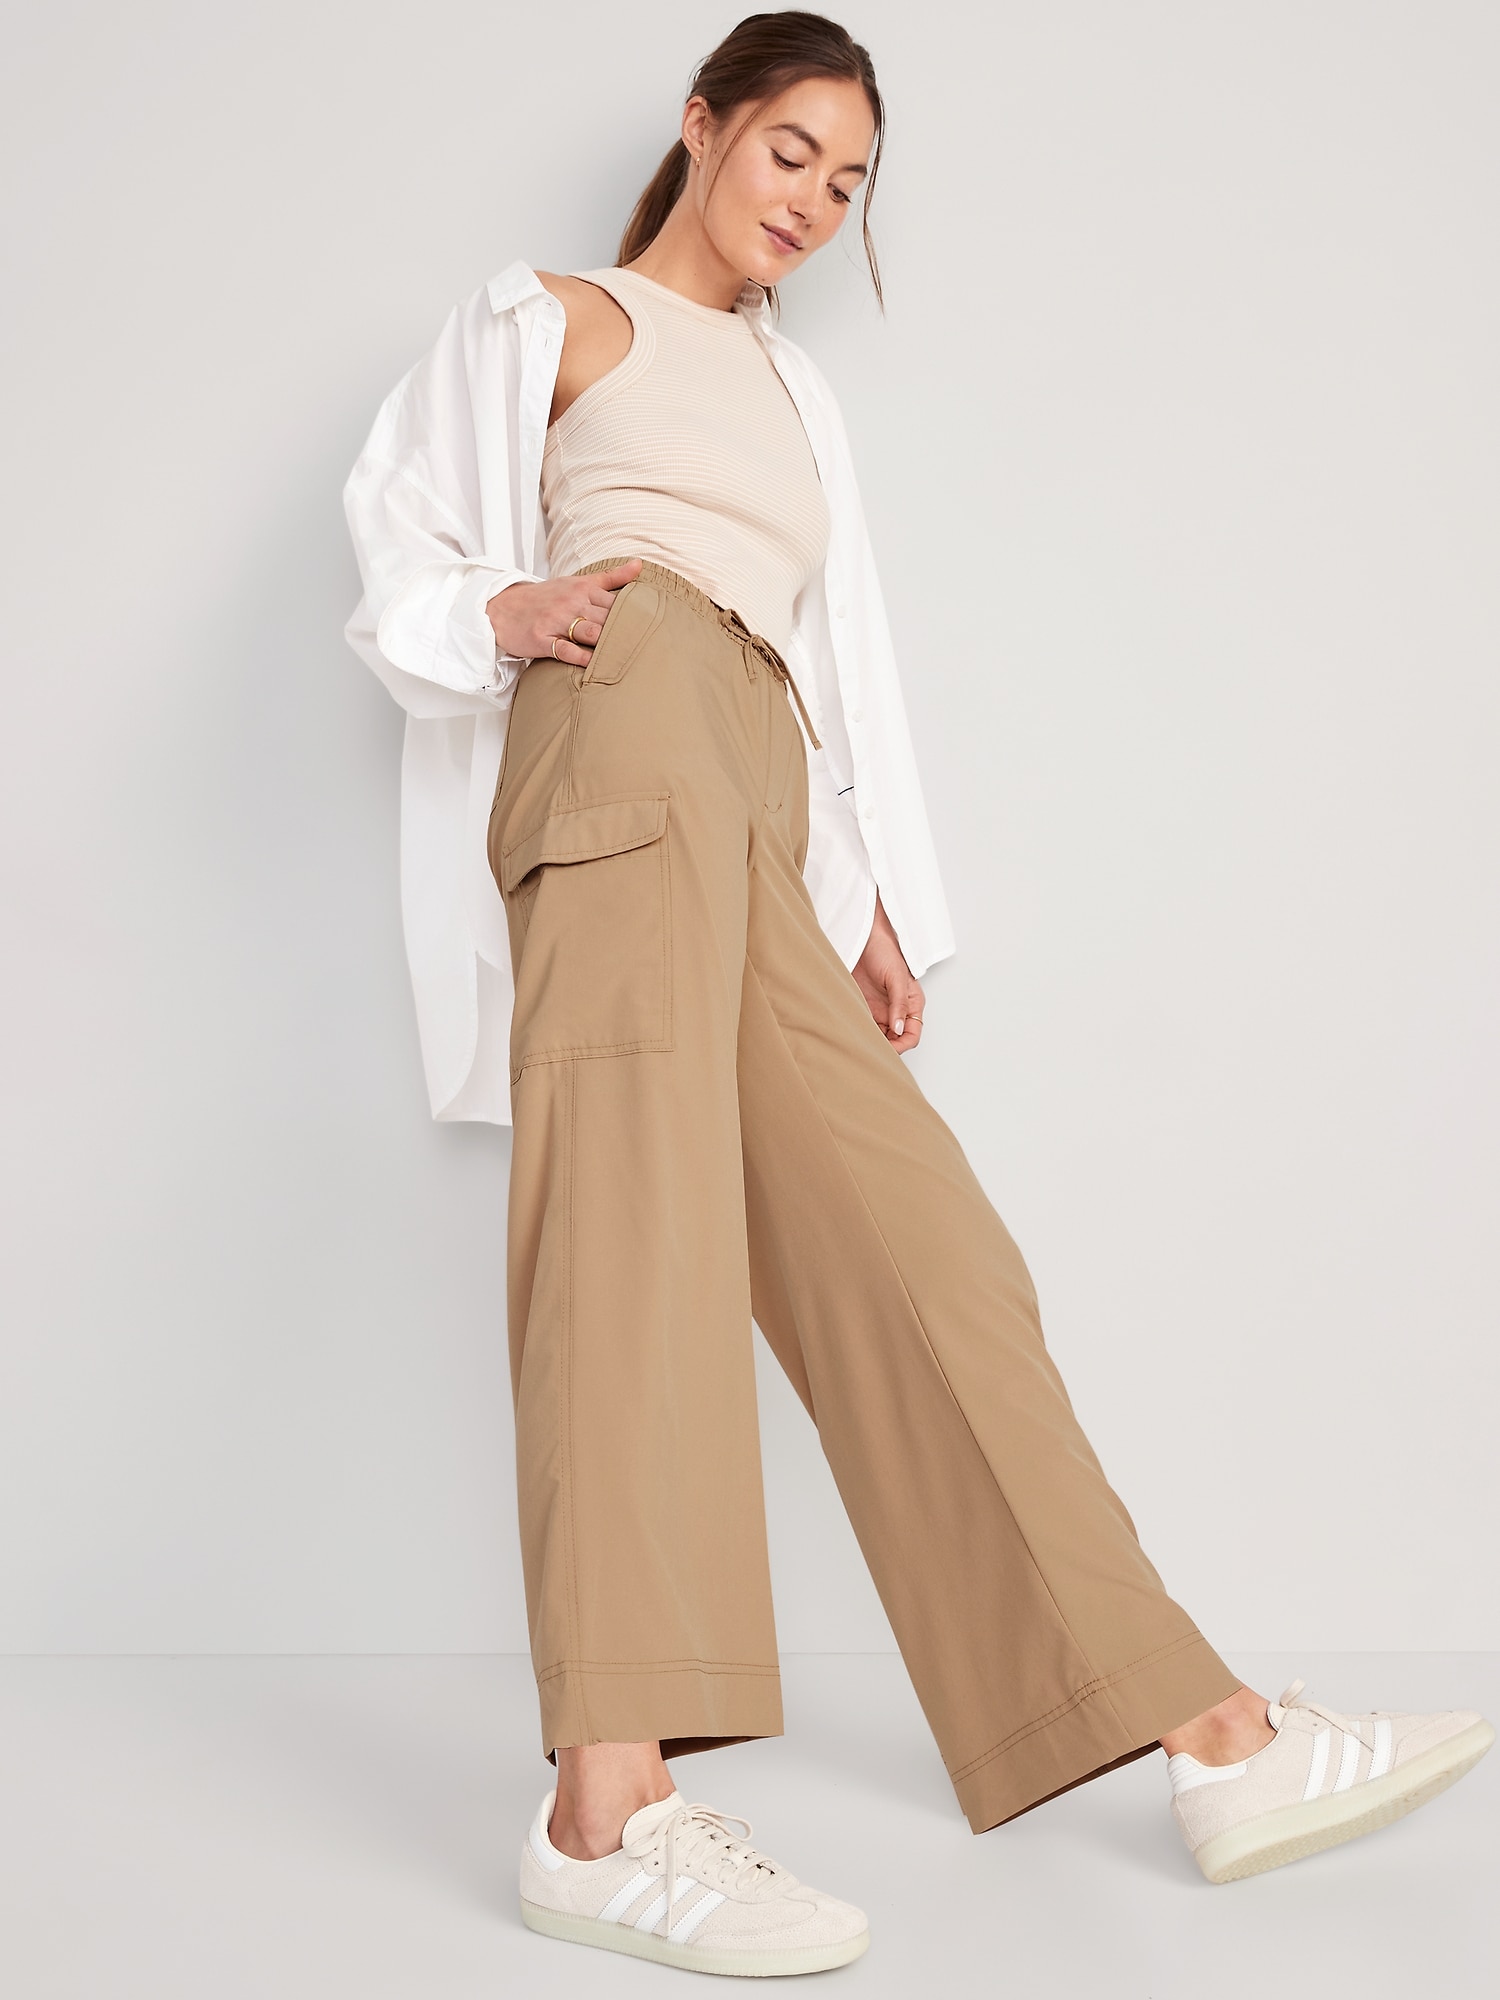 How to Wear Wide-Leg Pants for Women over 50 - A Well Styled Life®